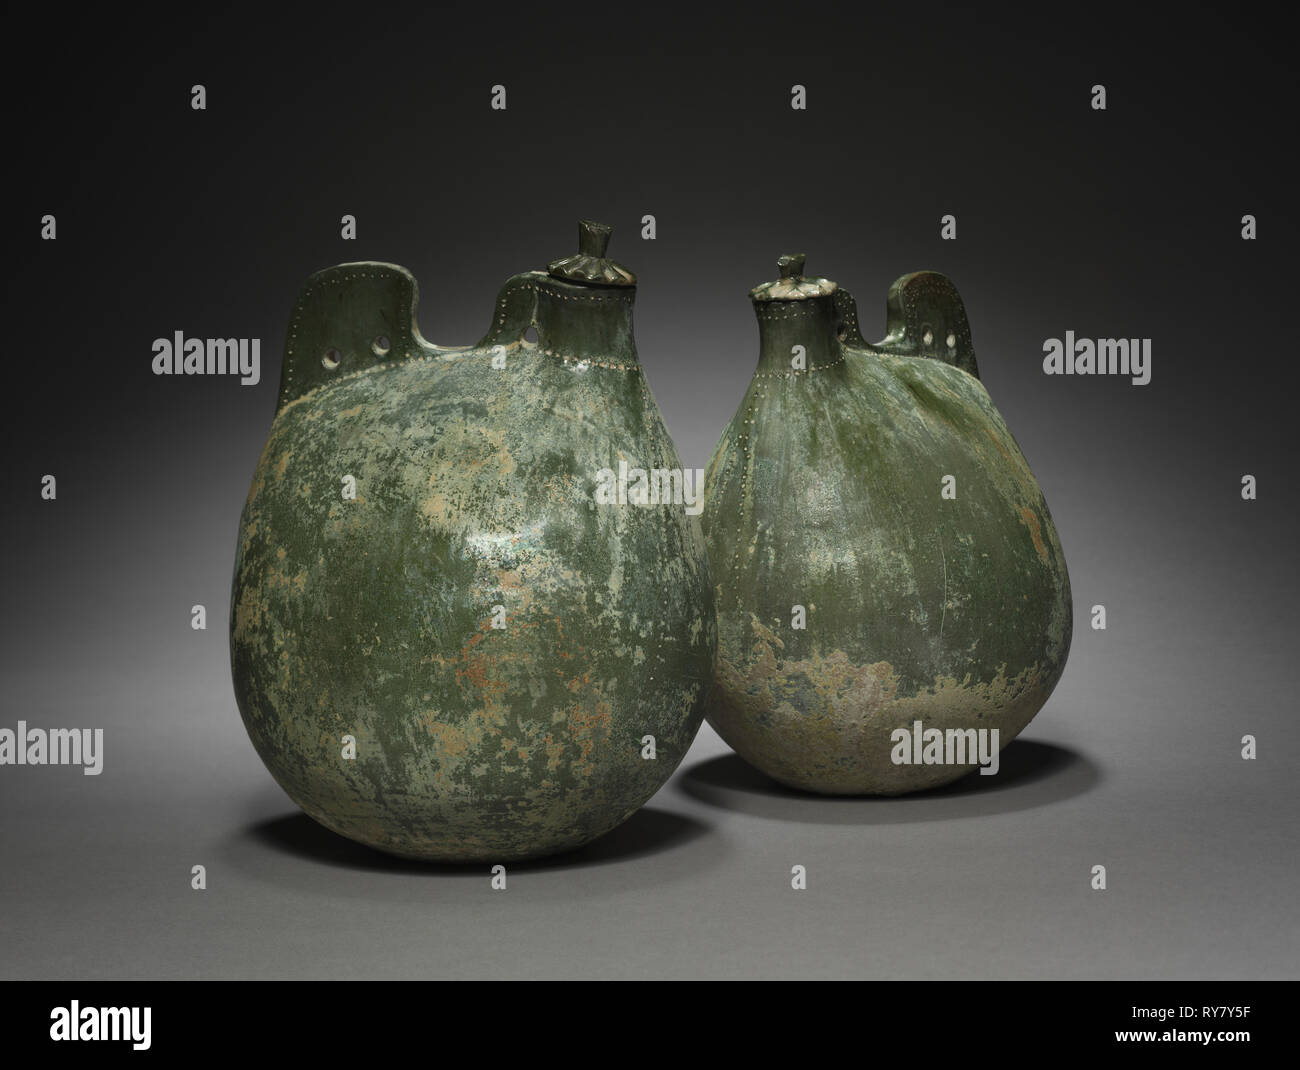 Pair of Leather Bag-Shaped Flasks with Covers, 916-1125. Northeast China, Liao dynasty (916-1125). Earthenware with green glaze; part 1: 24.5 x 16.5 x 16 cm (9 5/8 x 6 1/2 x 6 5/16 in.); part 2: 23.5 x 17.5 x 13.8 cm (9 1/4 x 6 7/8 x 5 7/16 in Stock Photo